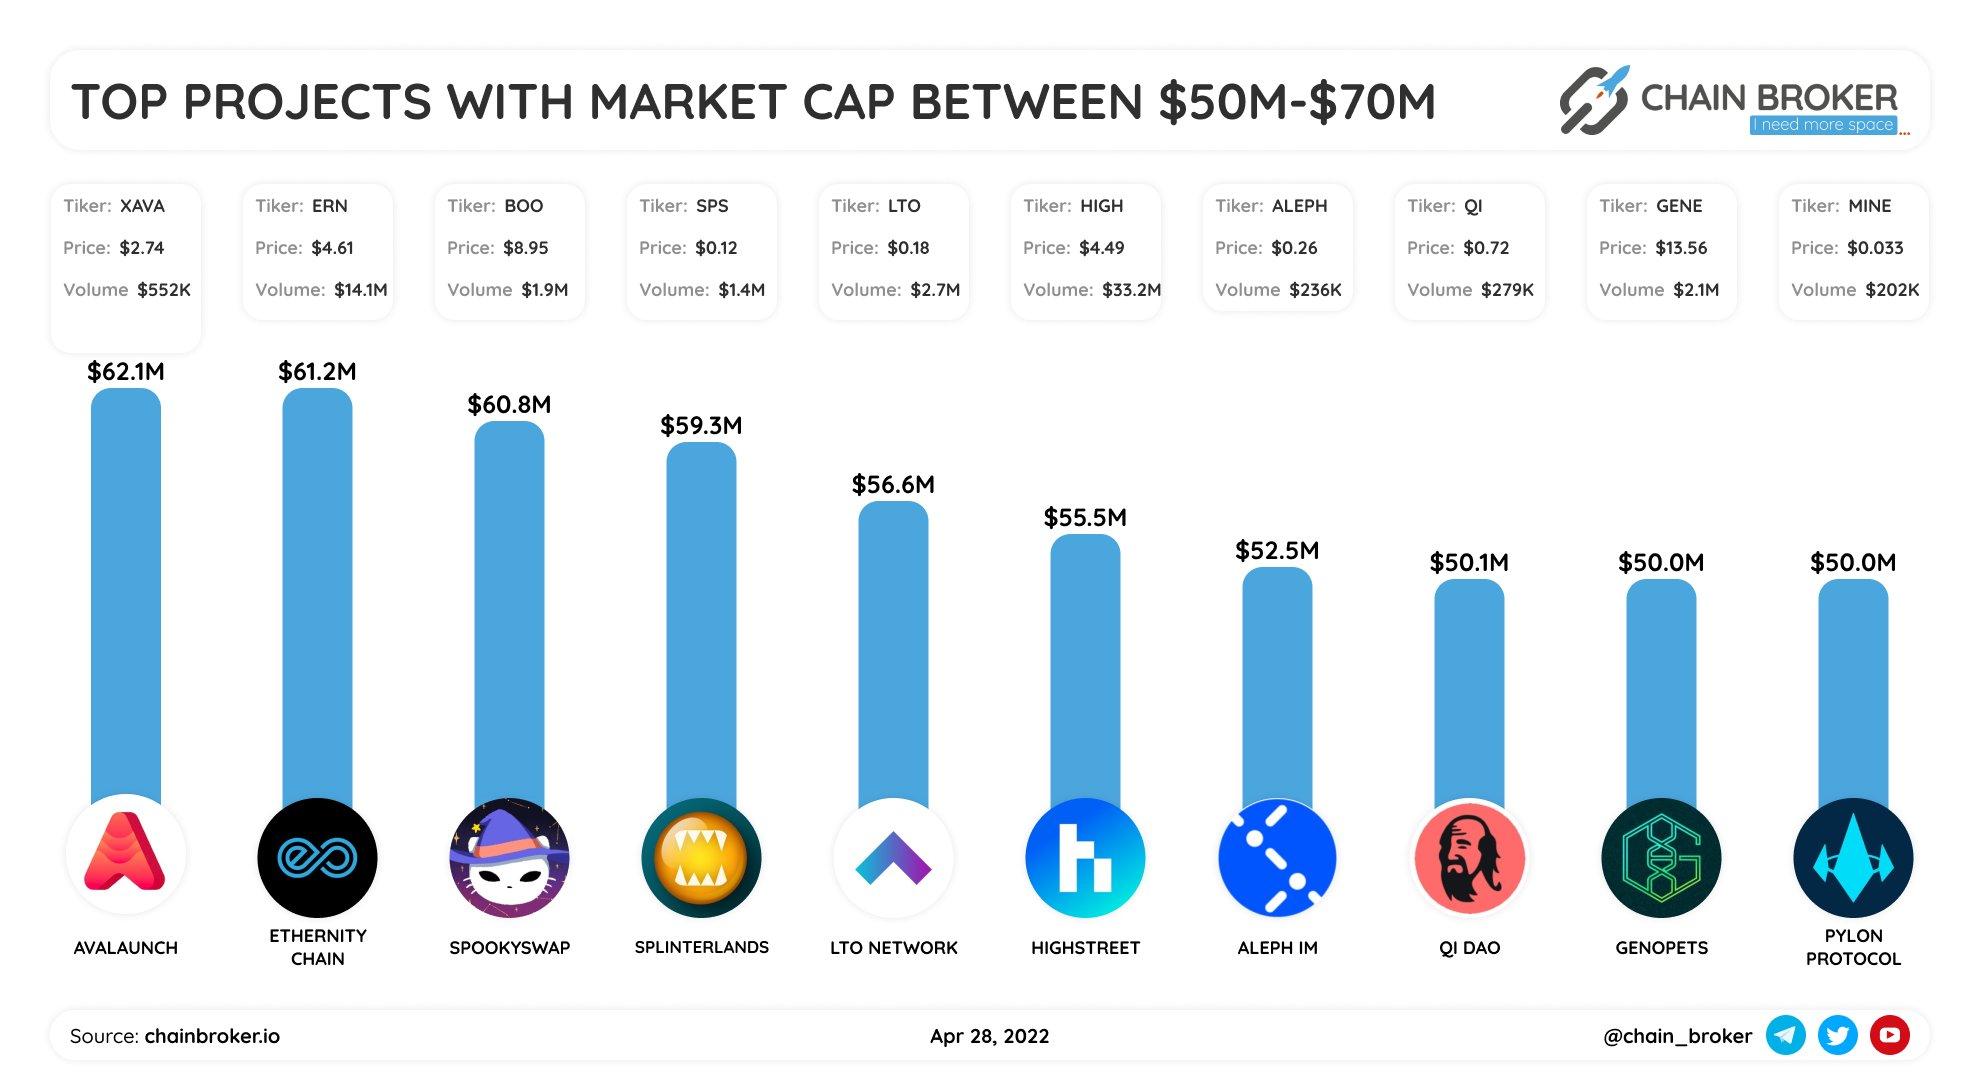 Top projects with market cap between $50M-$70M